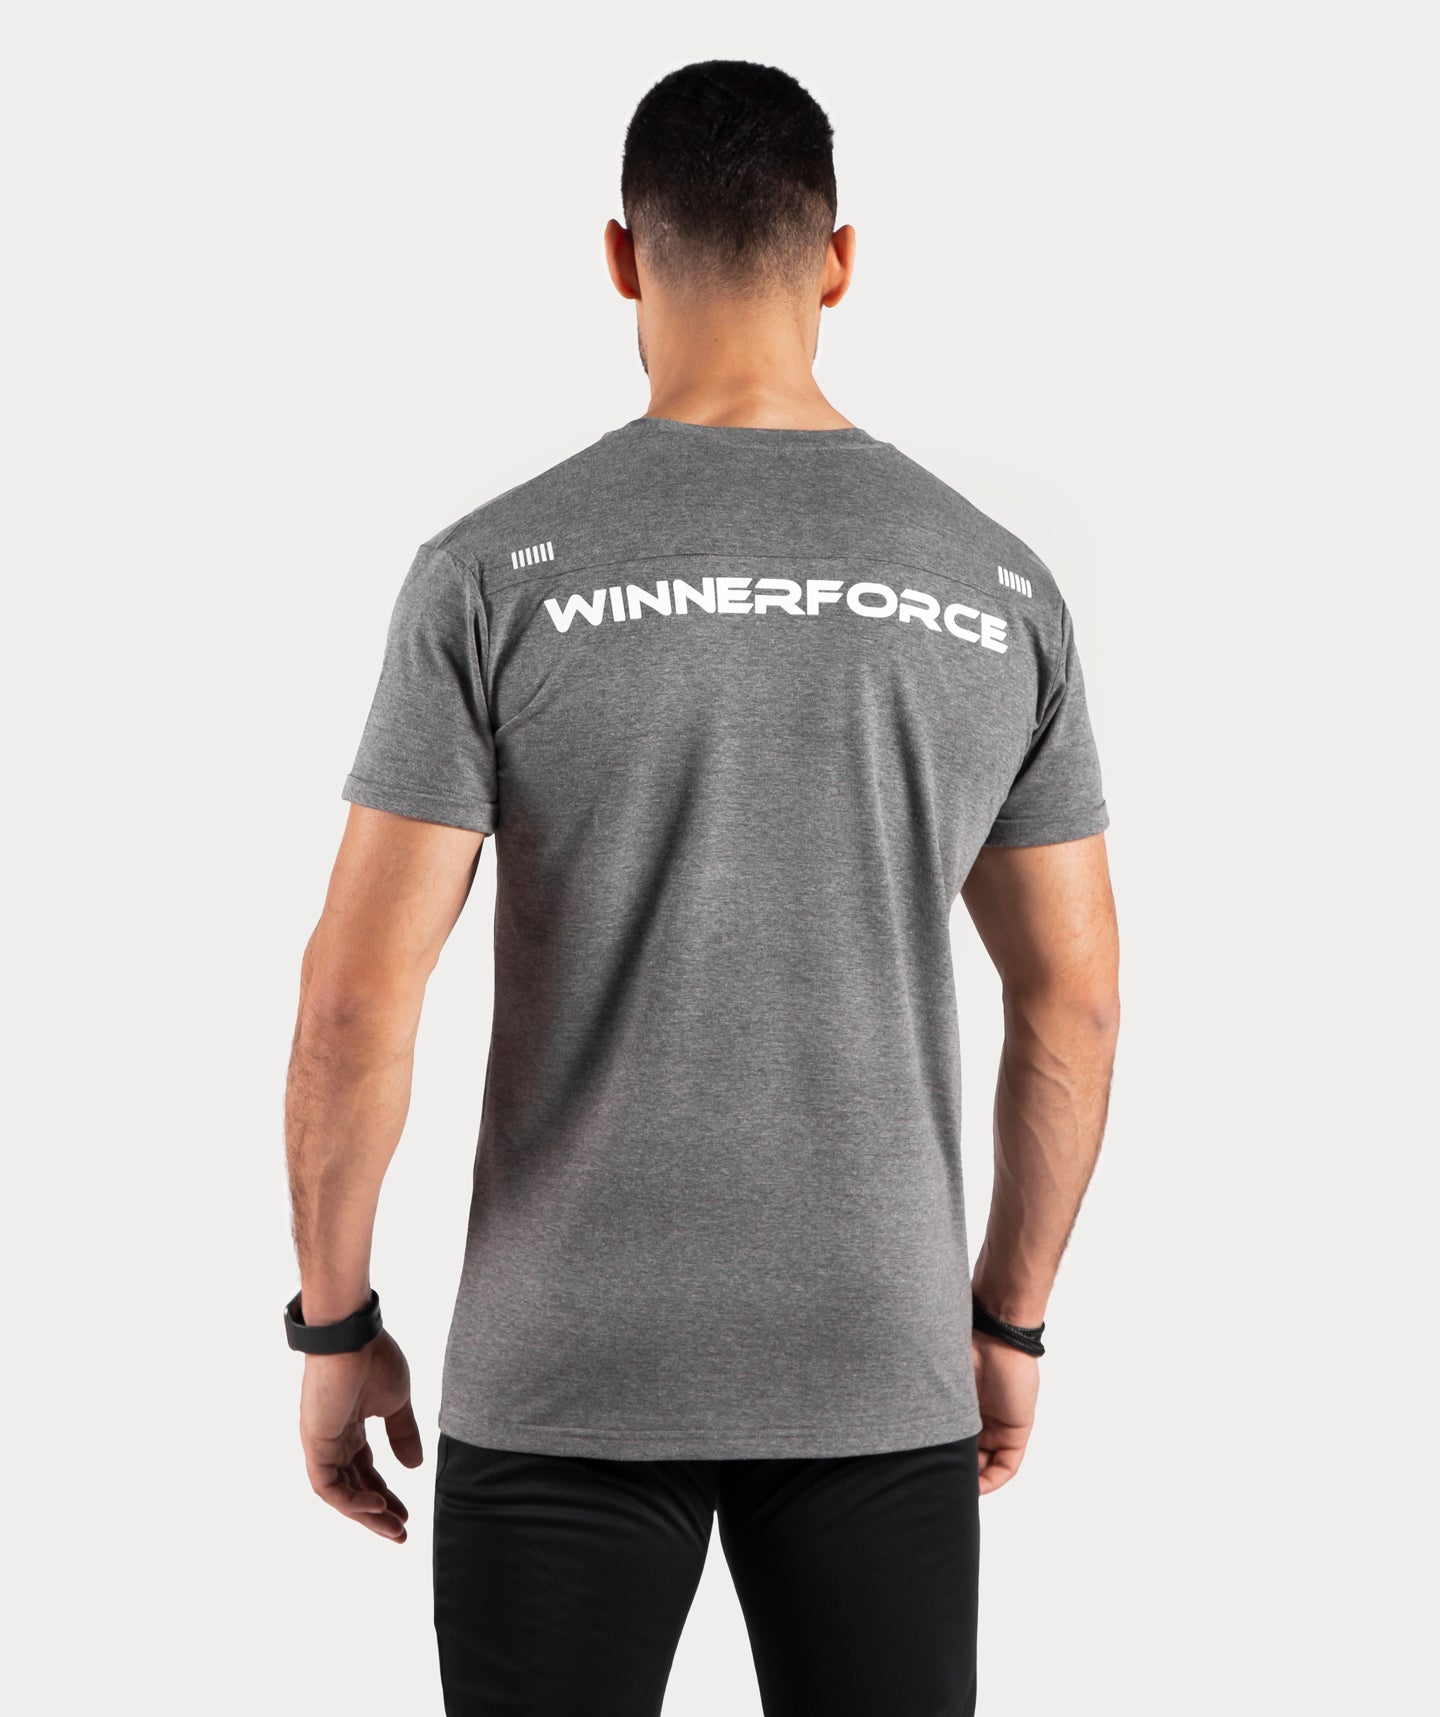 Winnerforce is  a lebanese based clothing and lifestyle brand that creates the best catchy t-shirts for men.